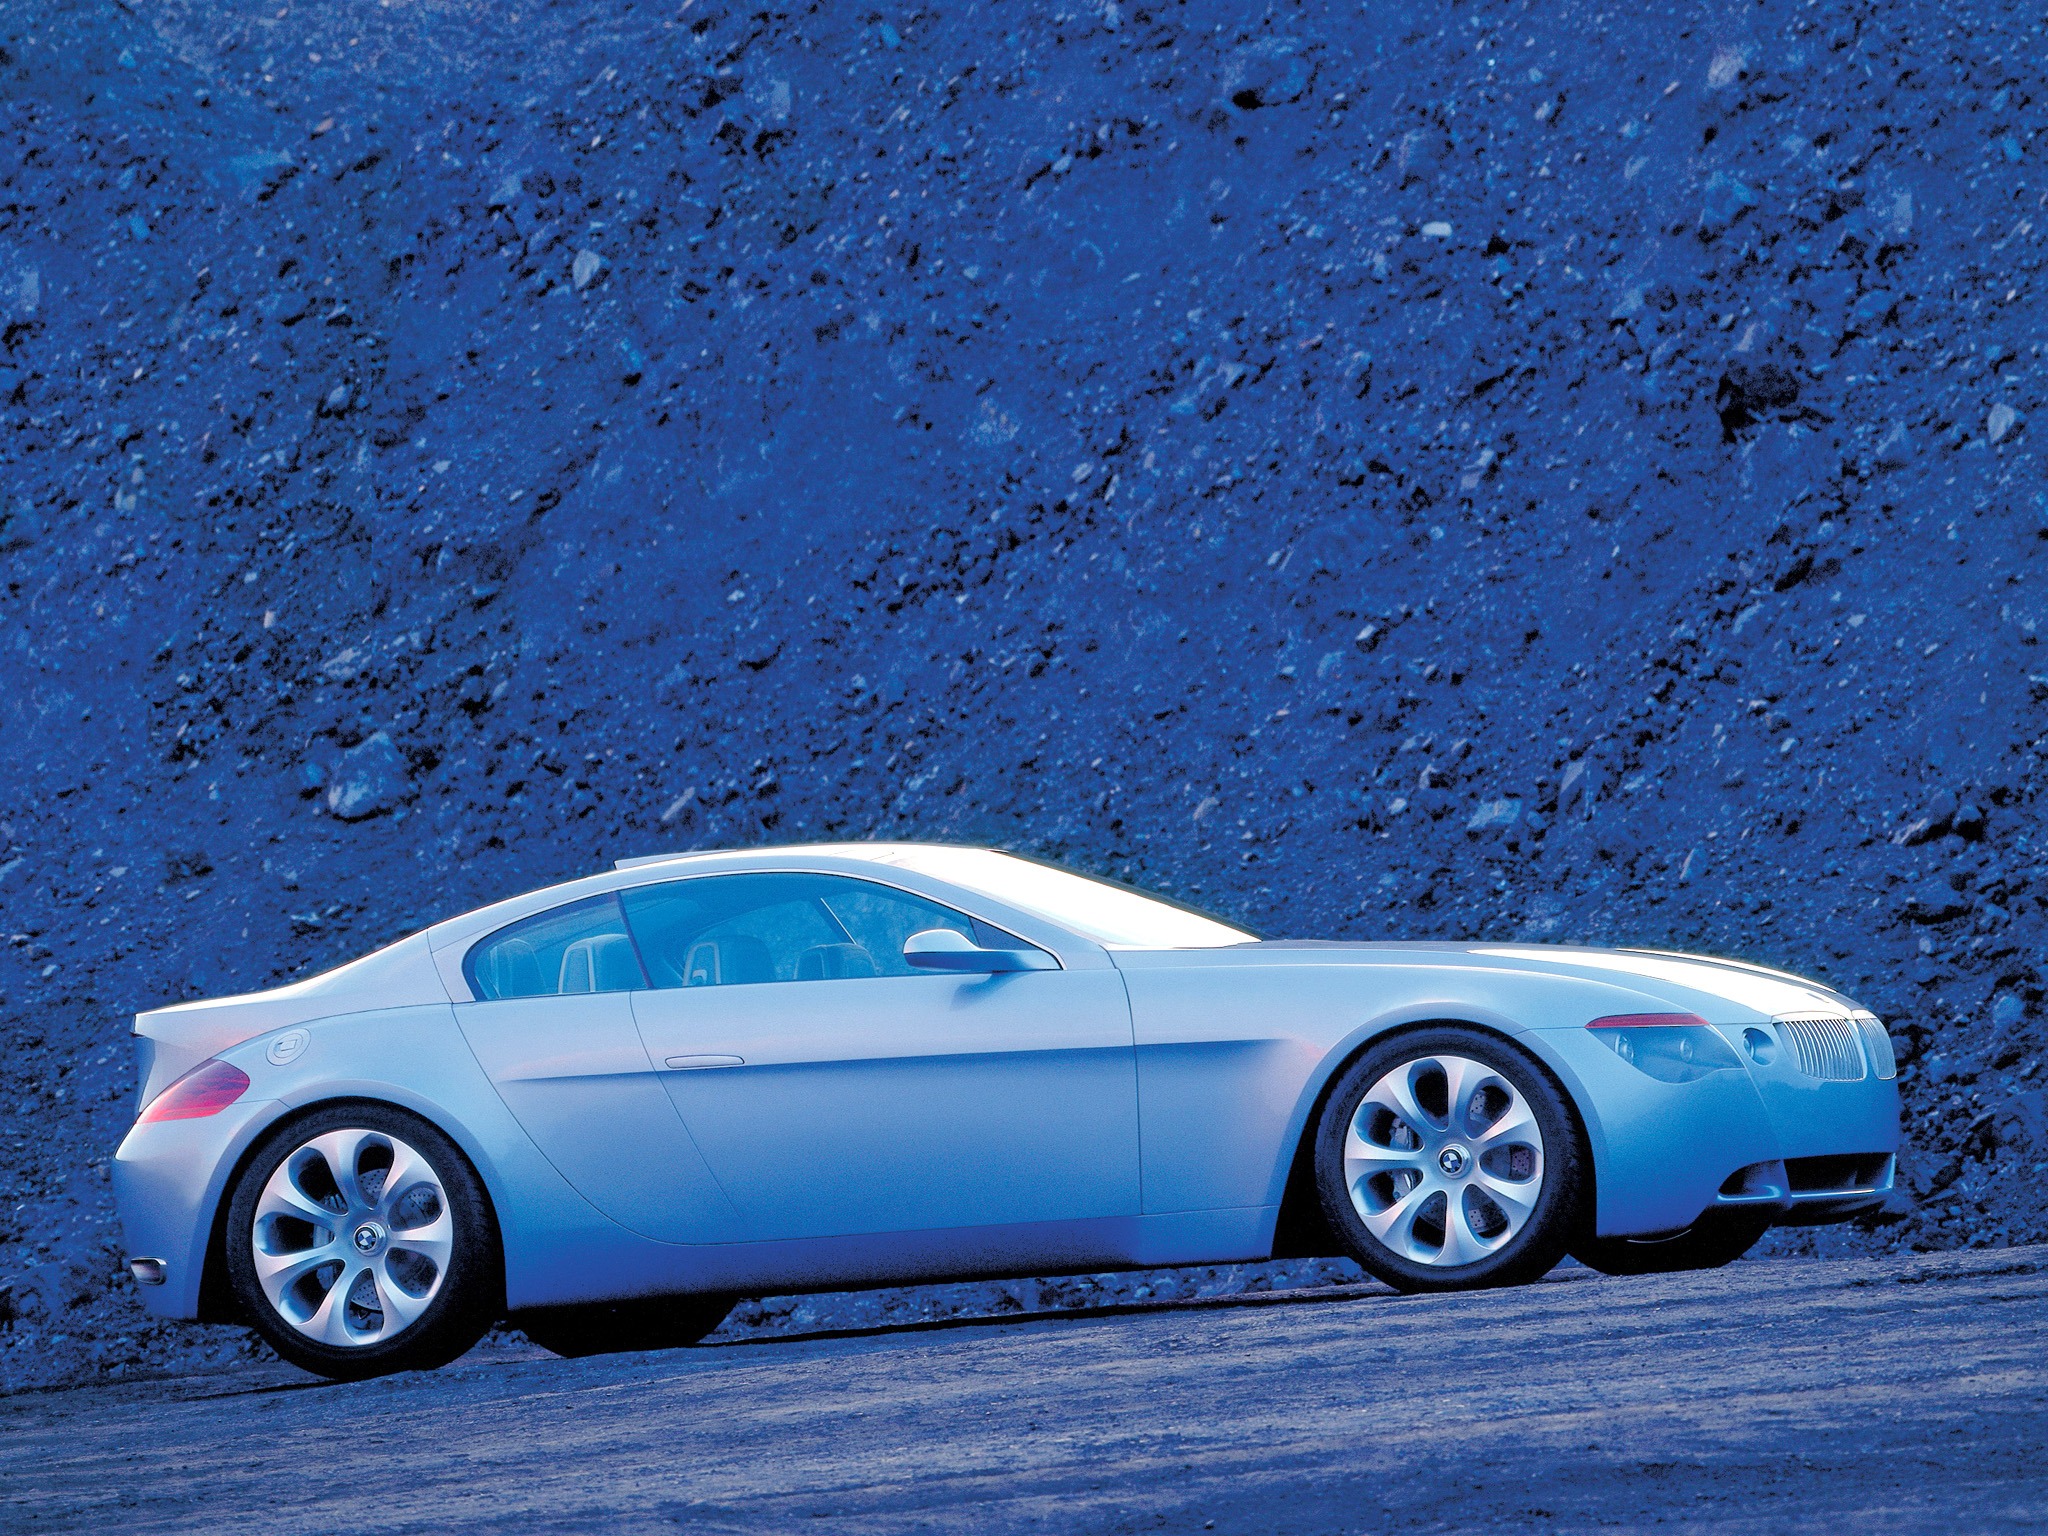 BMW Z9 (1999) - Old Concept Cars